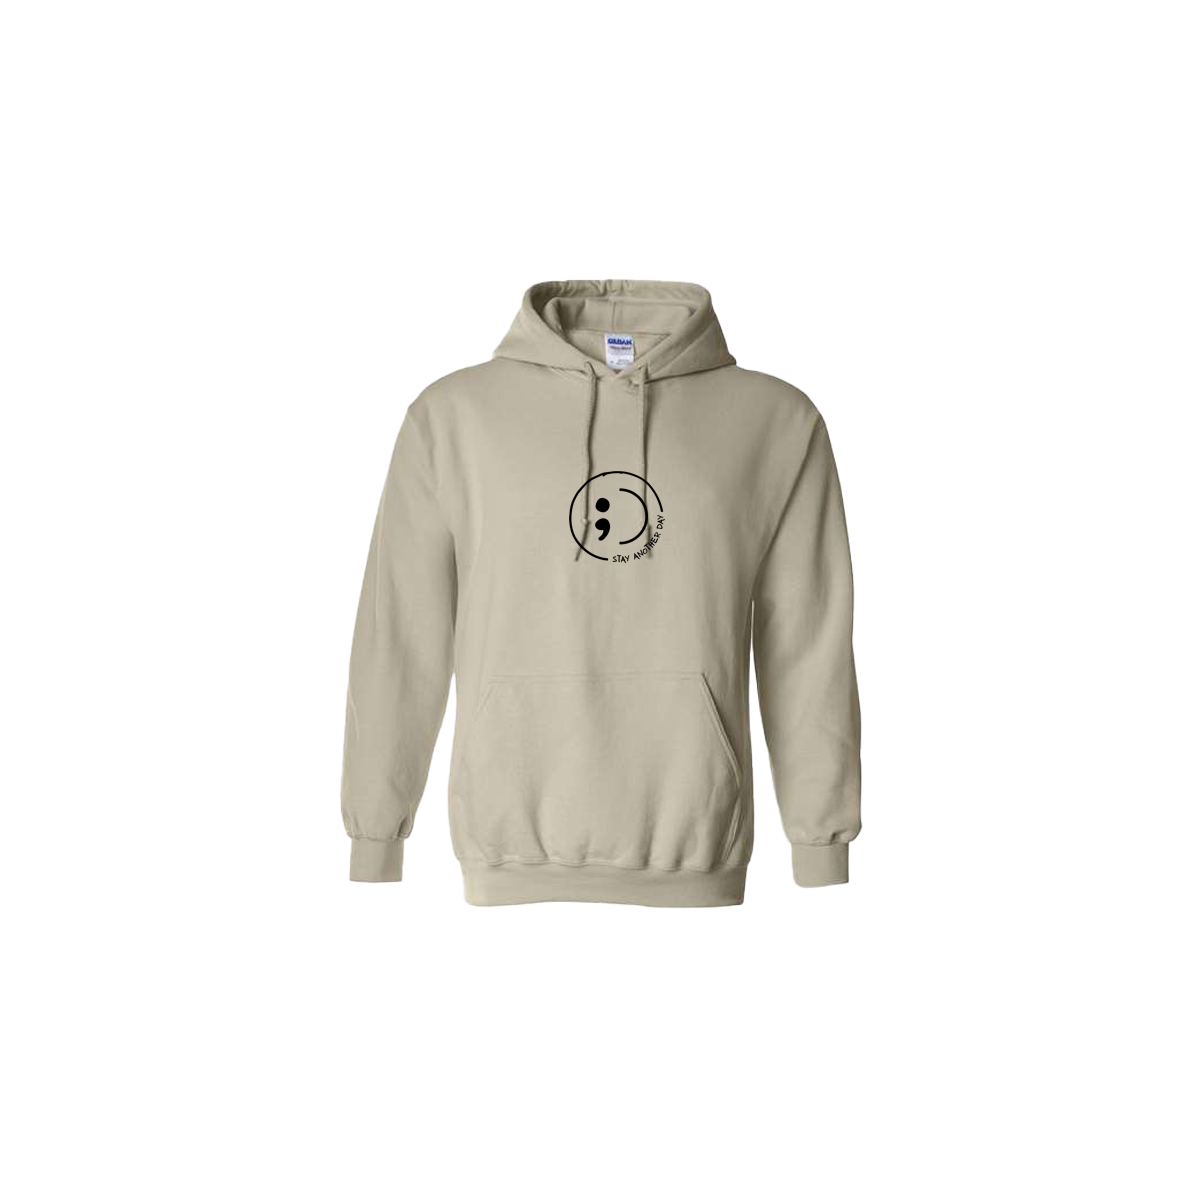 Stay Another Day Smiley with text Embroidered Beige Hoodie - Mental Health Awareness Clothing